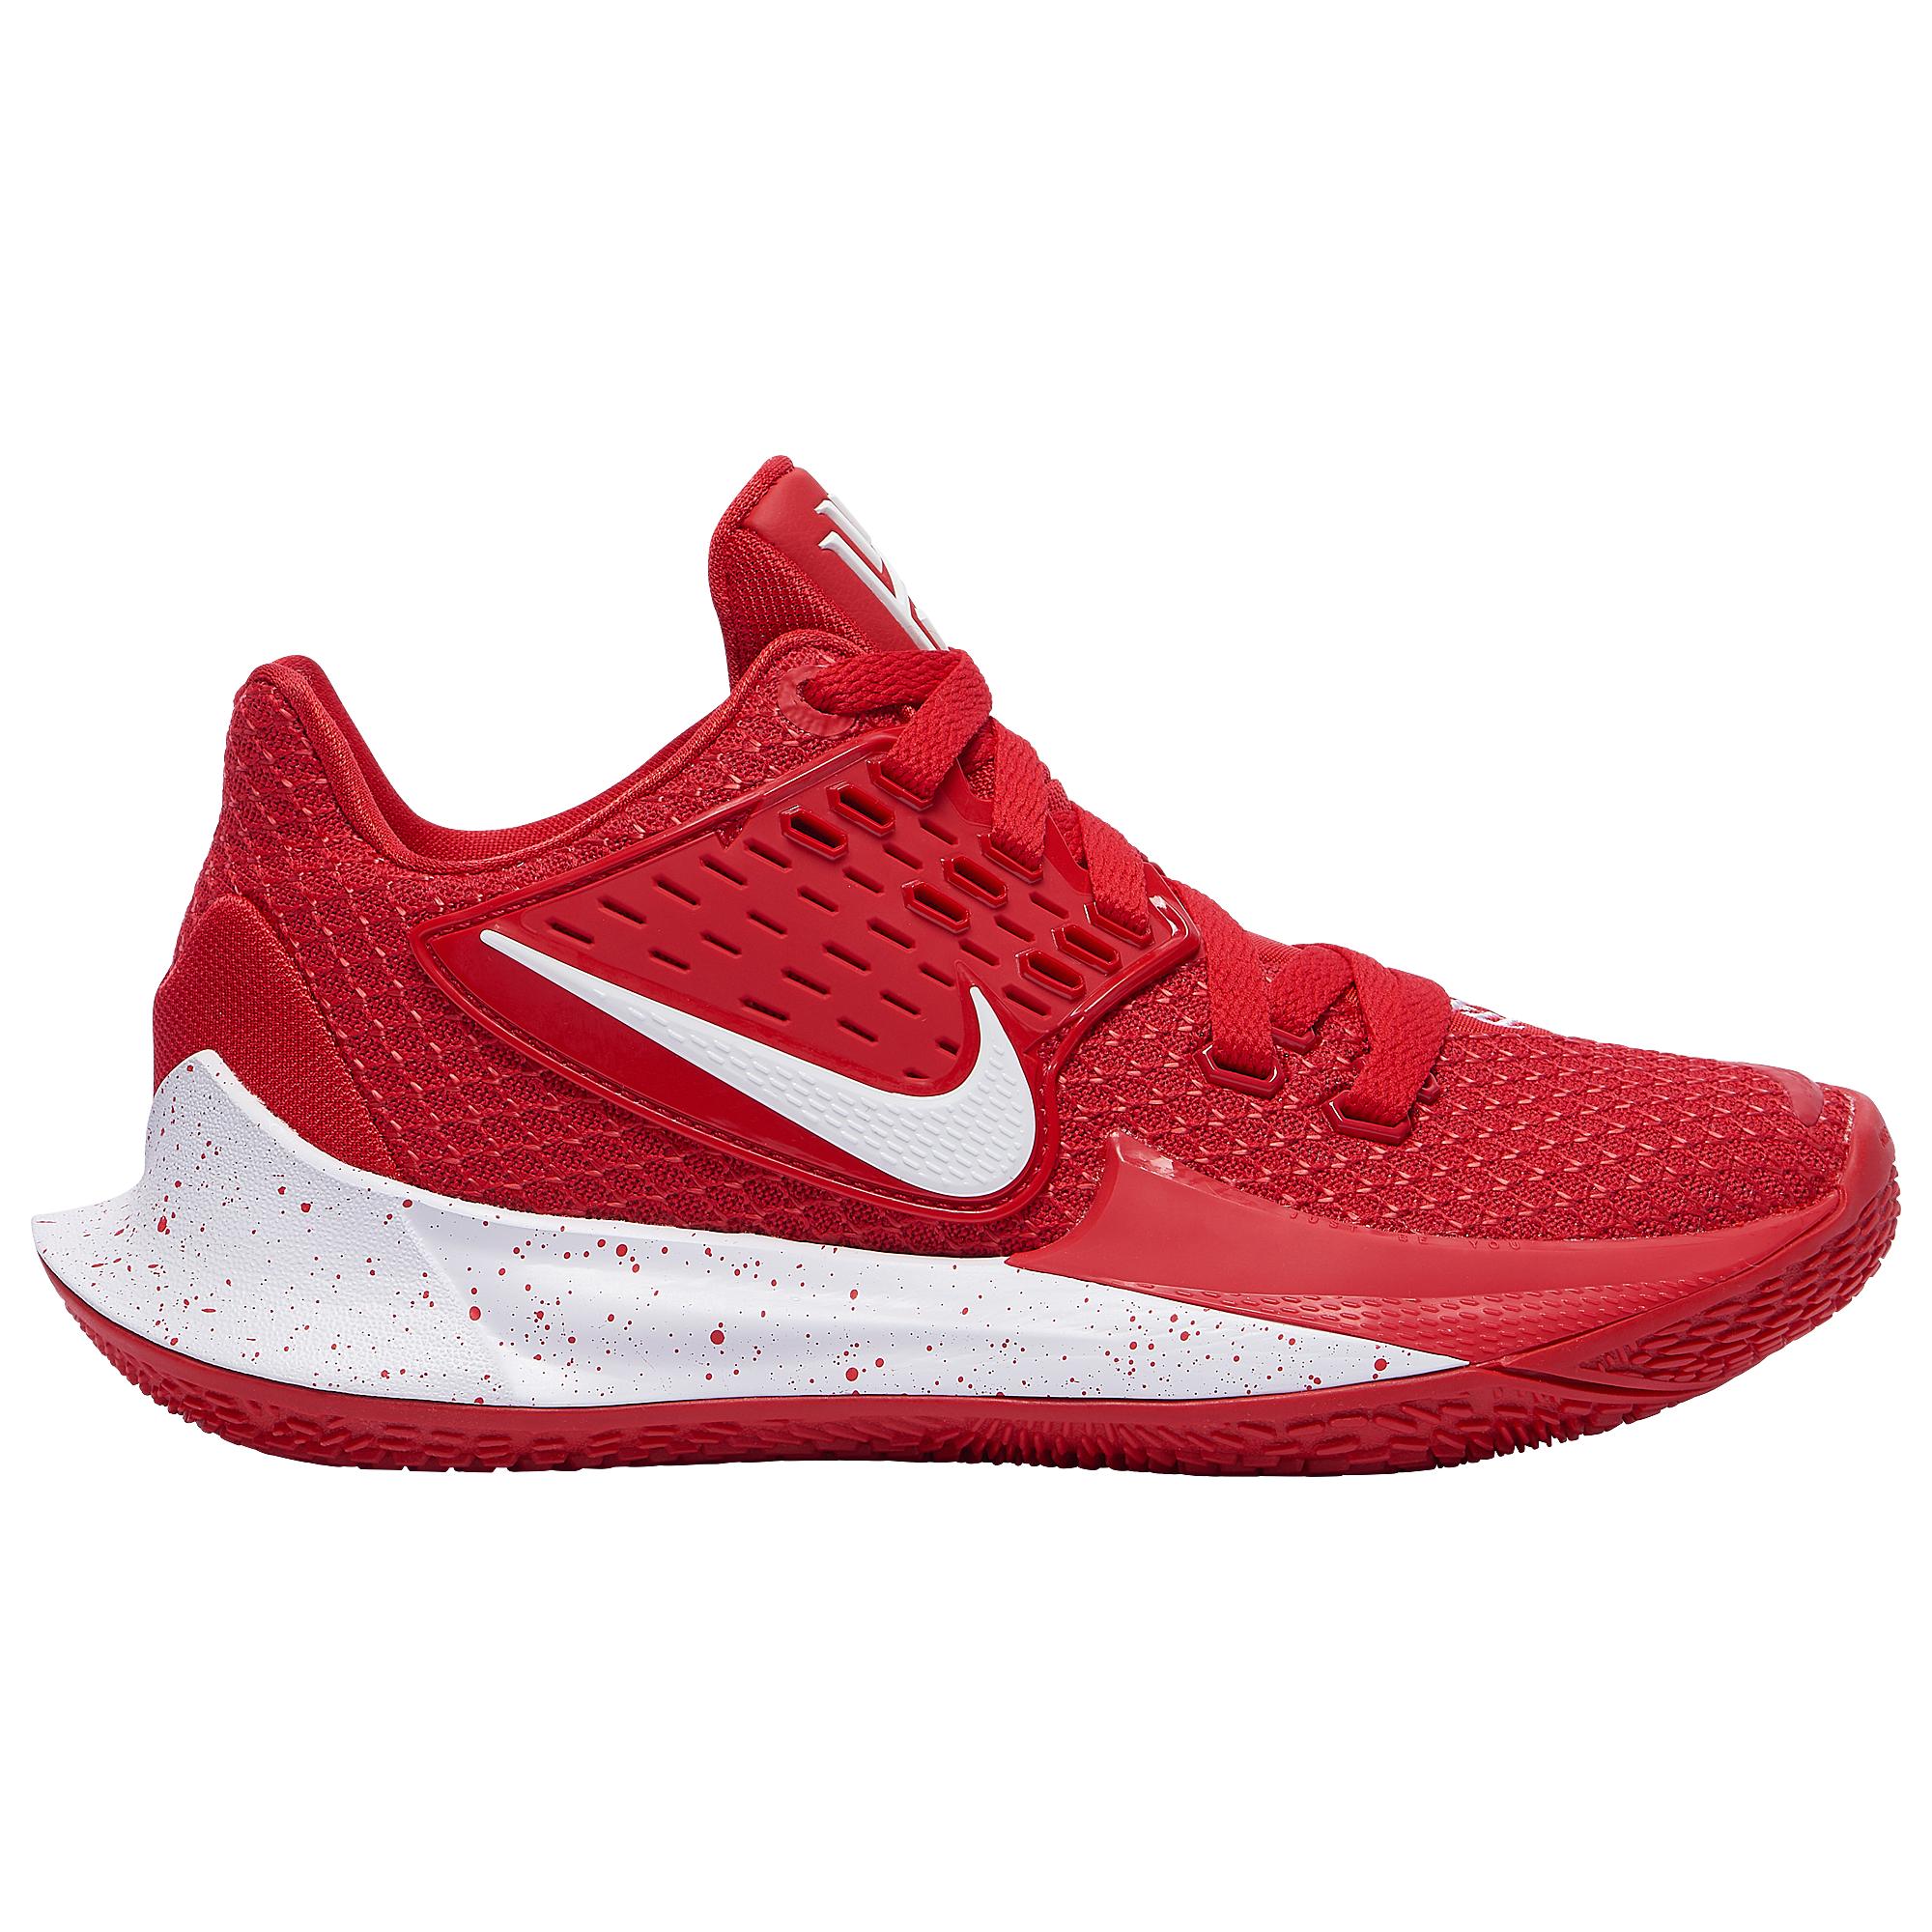 Nike Kyrie Low 2 Basketball Shoes in University Red/White (Red) for Men ...